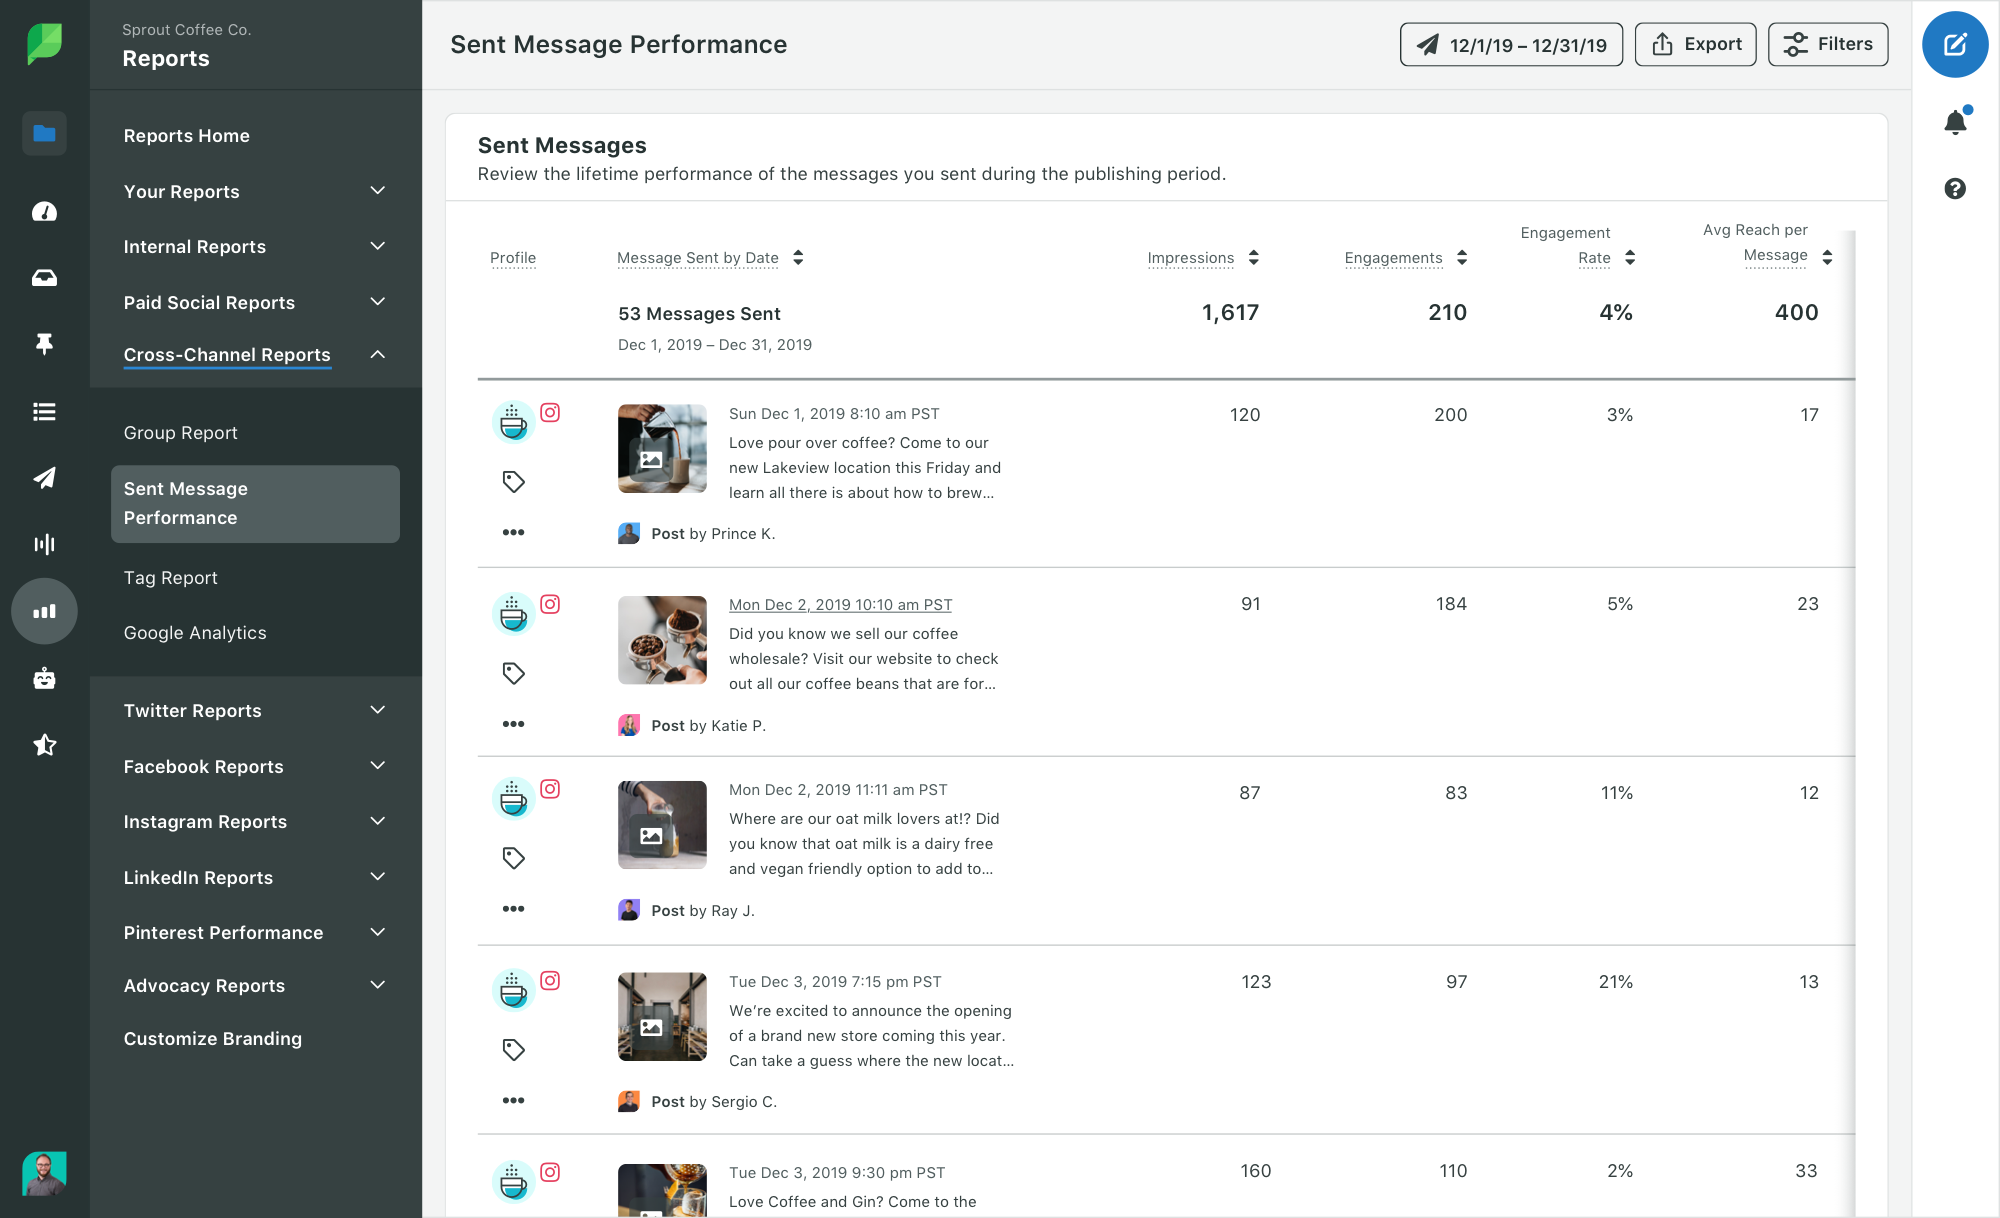 Screenshot example of engagement KPIs for social media campaigns and sent messages.